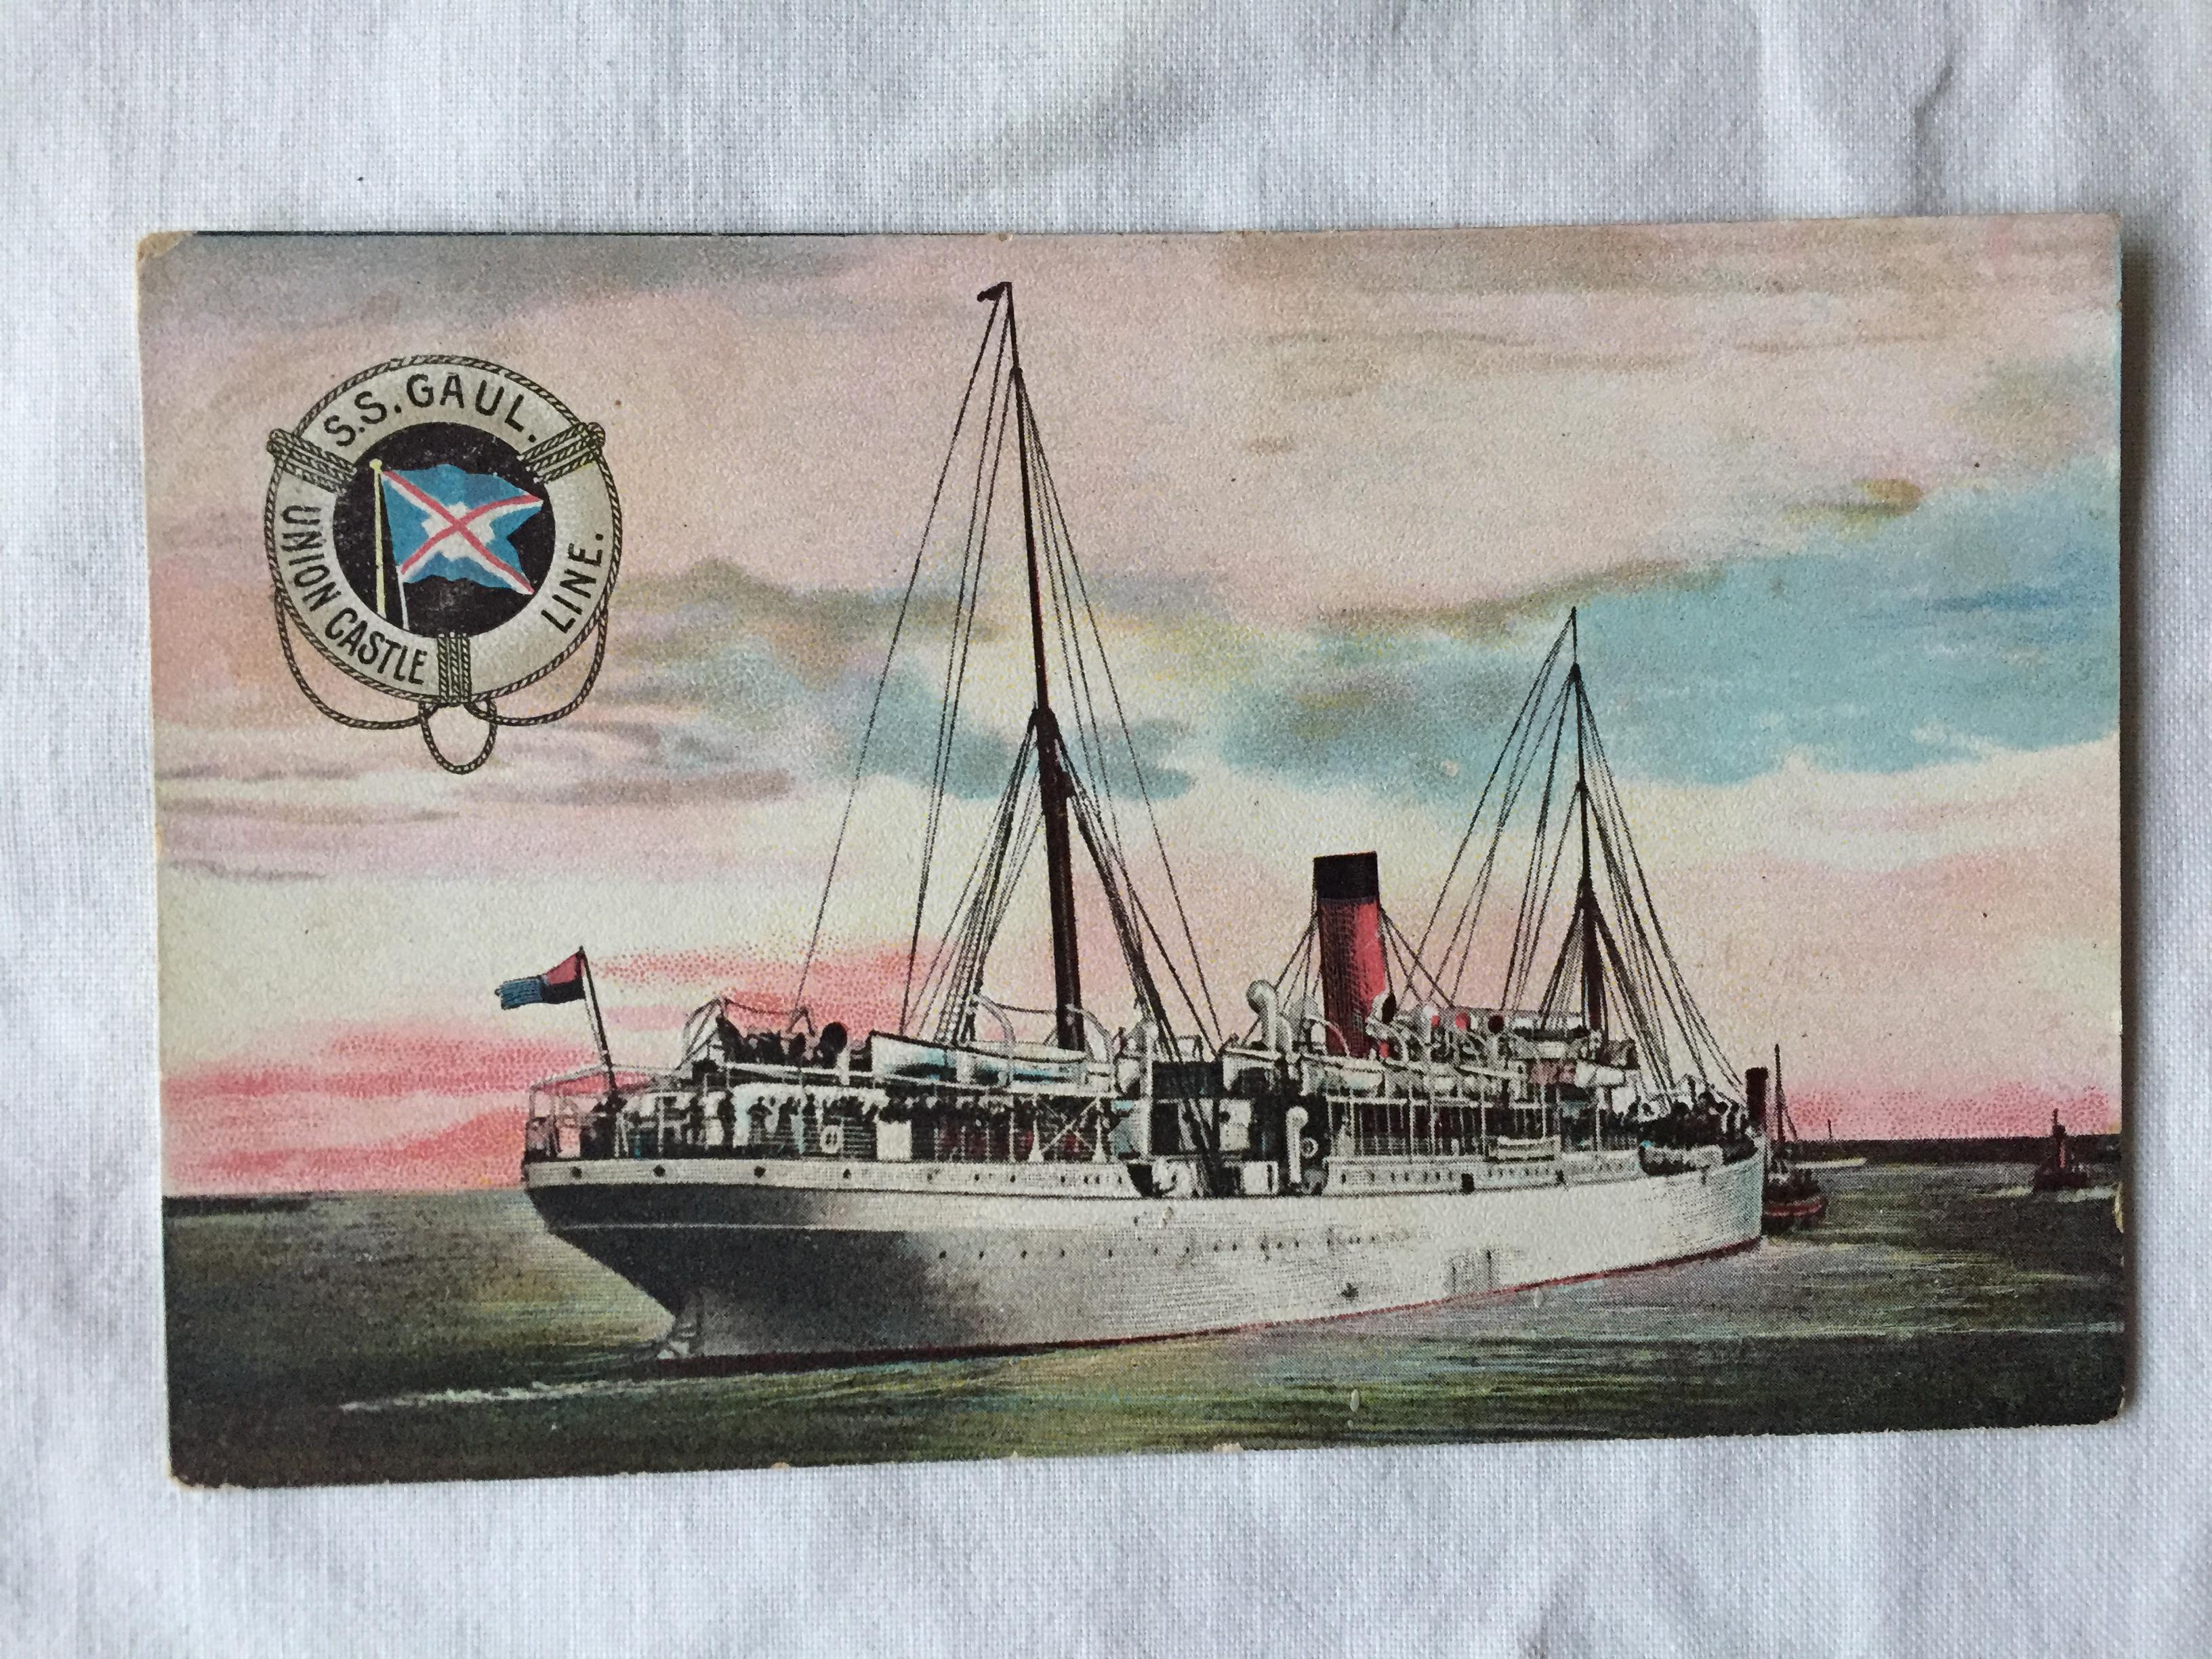 VERY EARLY USED COLOUR POSTCARD FROM THE UNION CASTLE LINE VESSEL THE GAUL WHICH WAS POSTED 24th MARCH 1905 